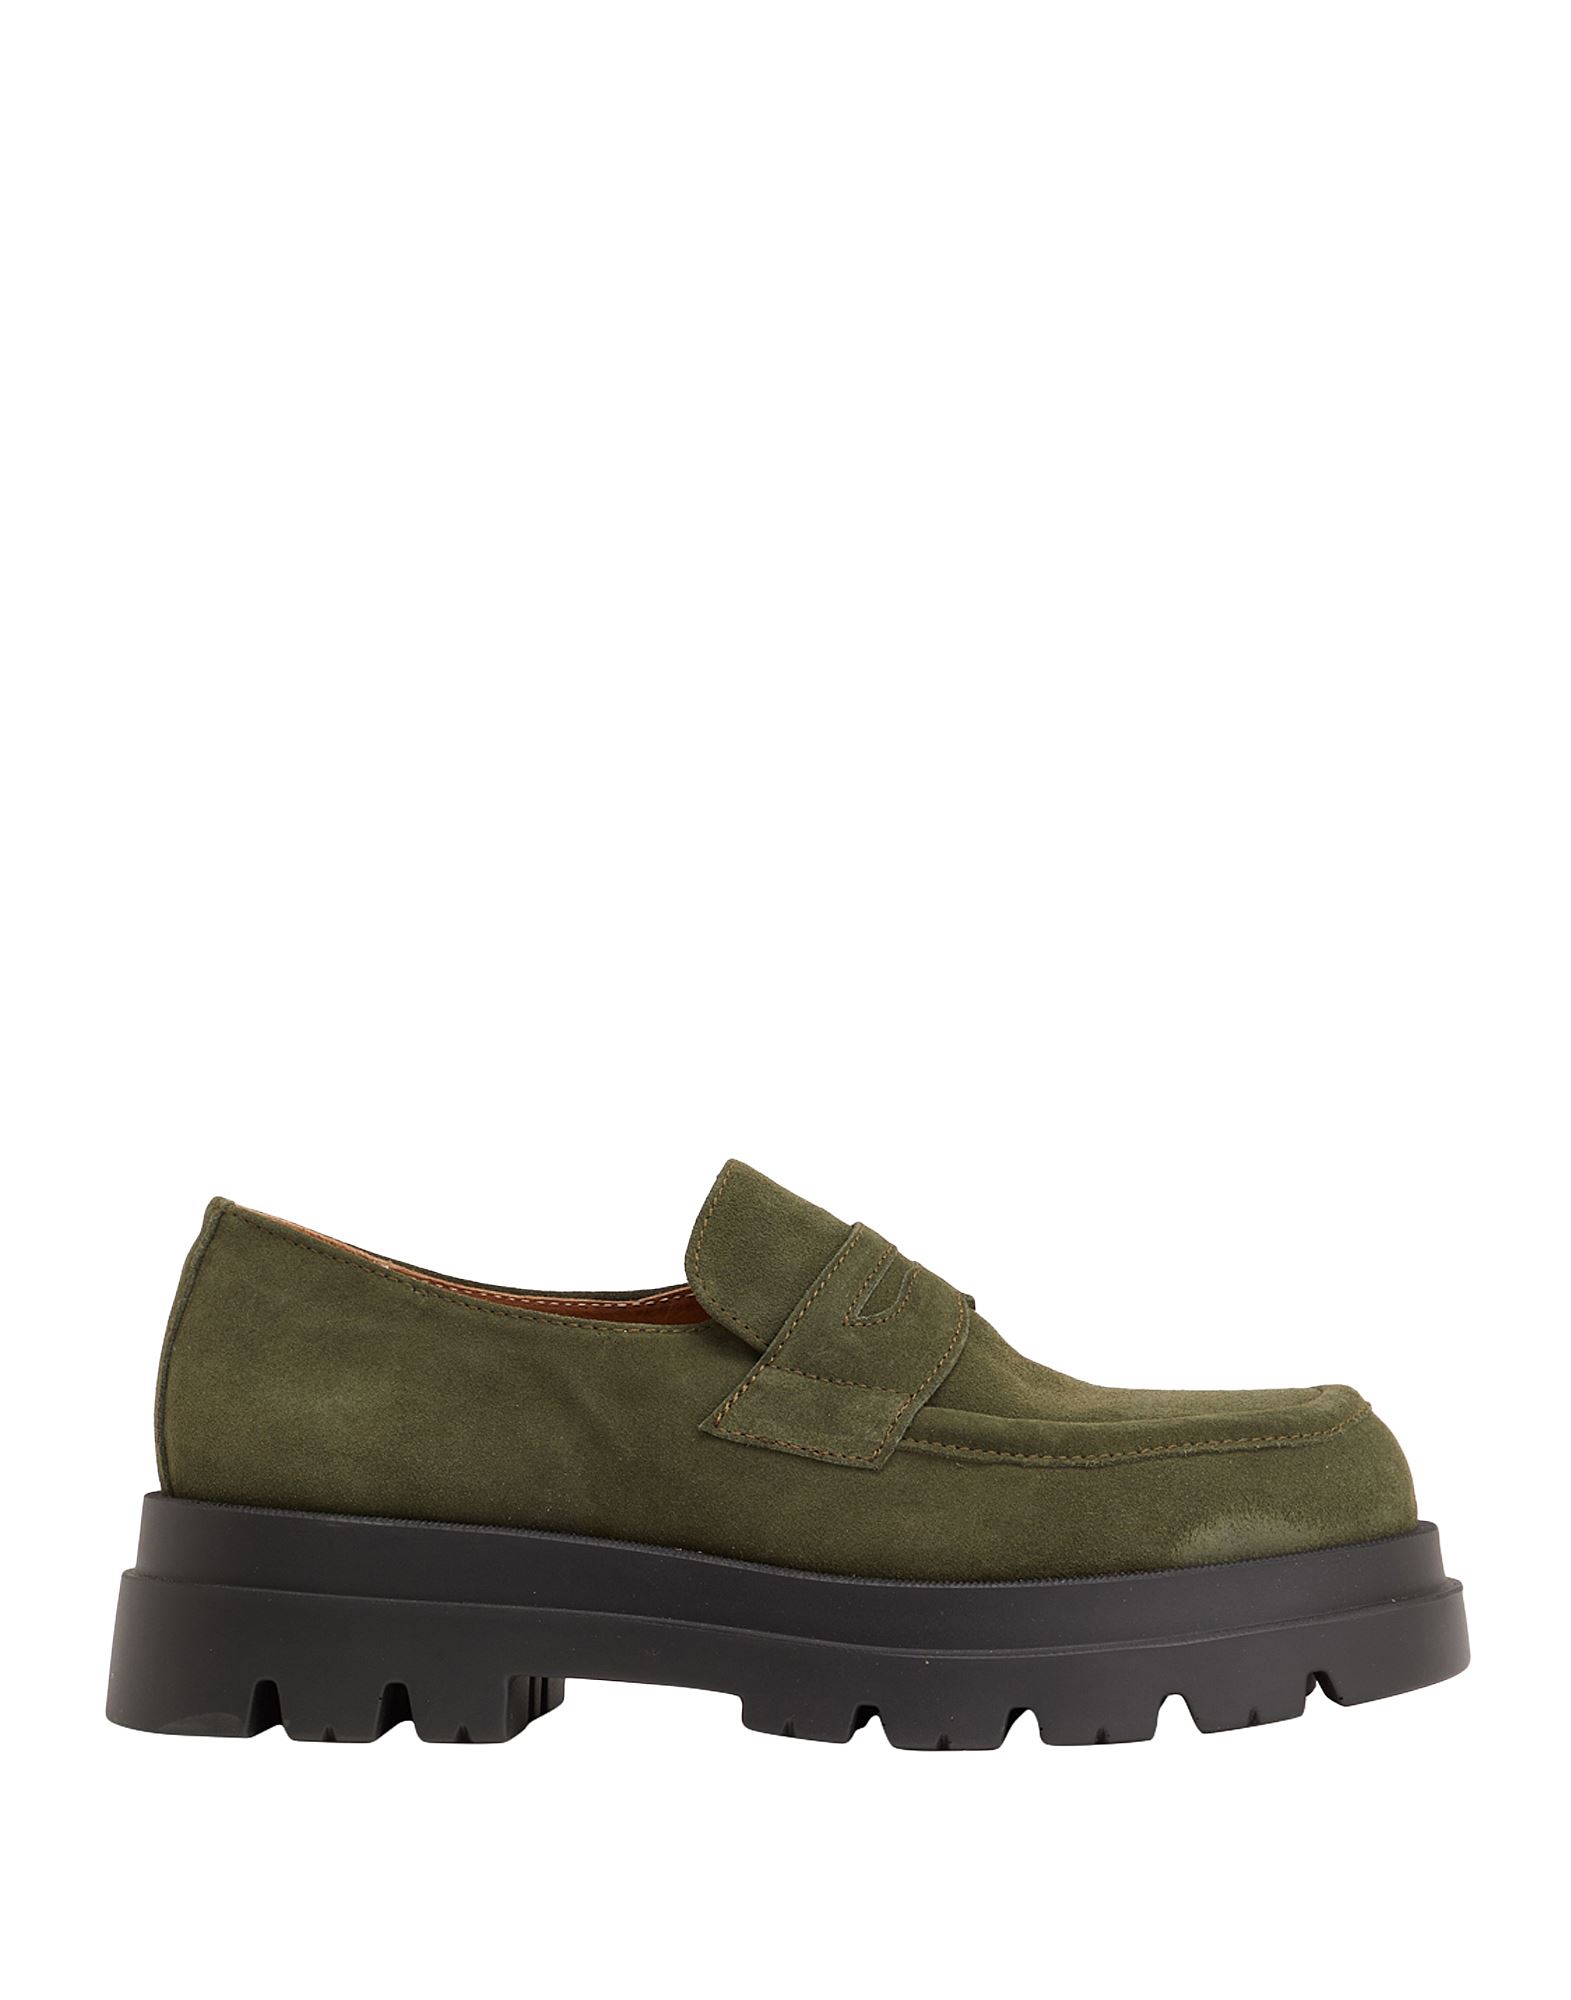 8 By Yoox Loafers In Green